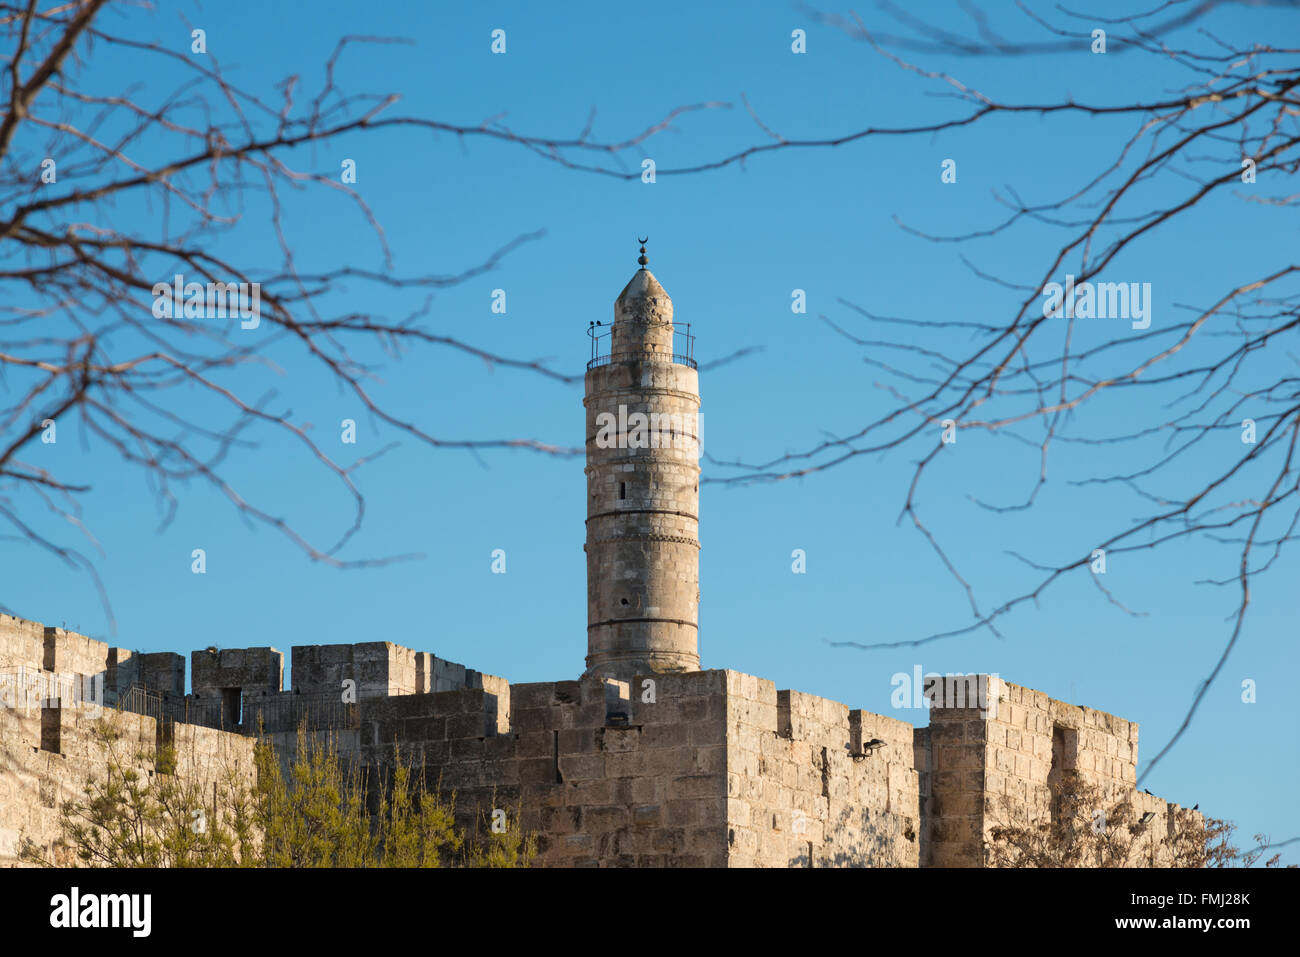 The minaret in the Tower of David. Jerusalem Old City. Israel. Stock Photo